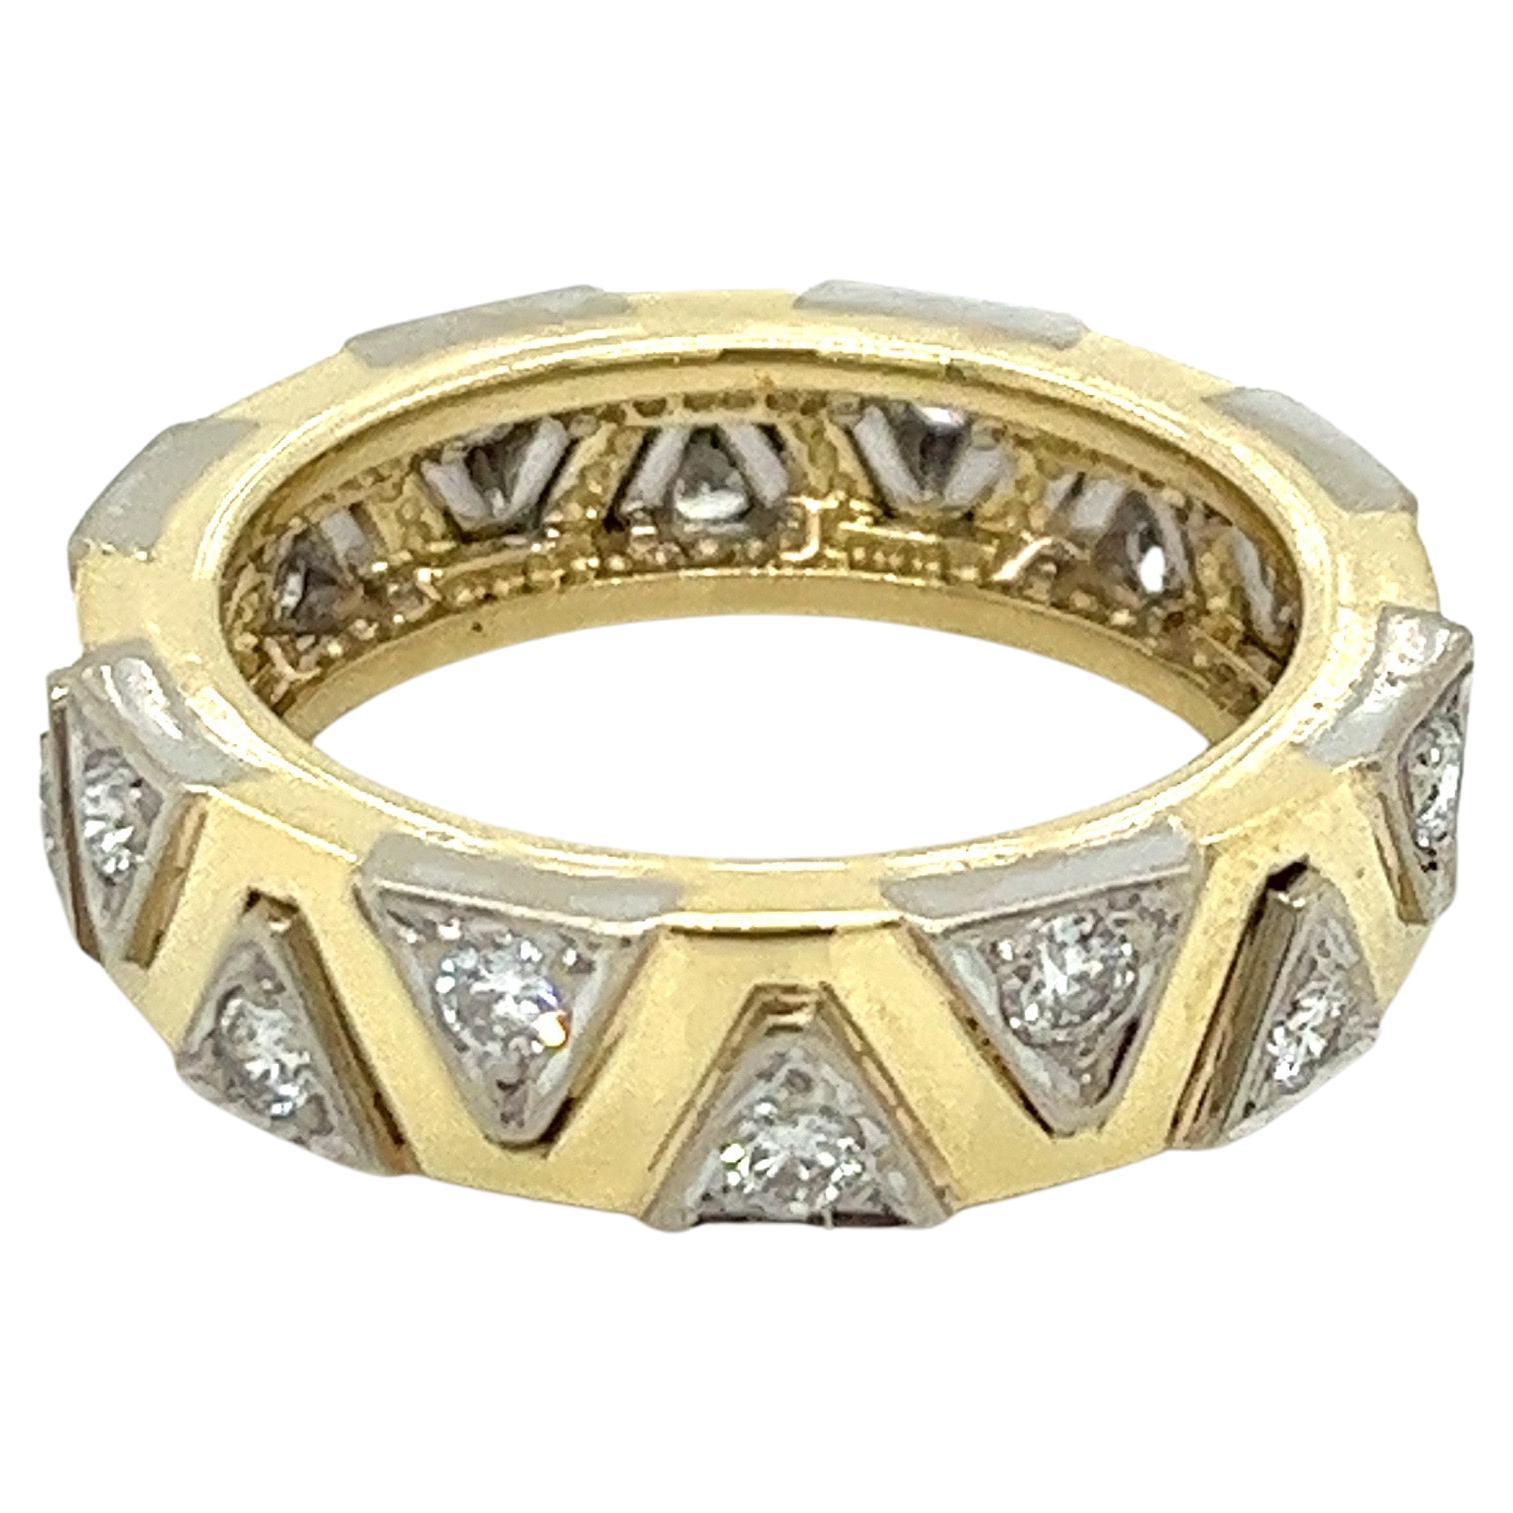 Vintage 14K Yellow Gold and White Gold Diamond Eternity Band